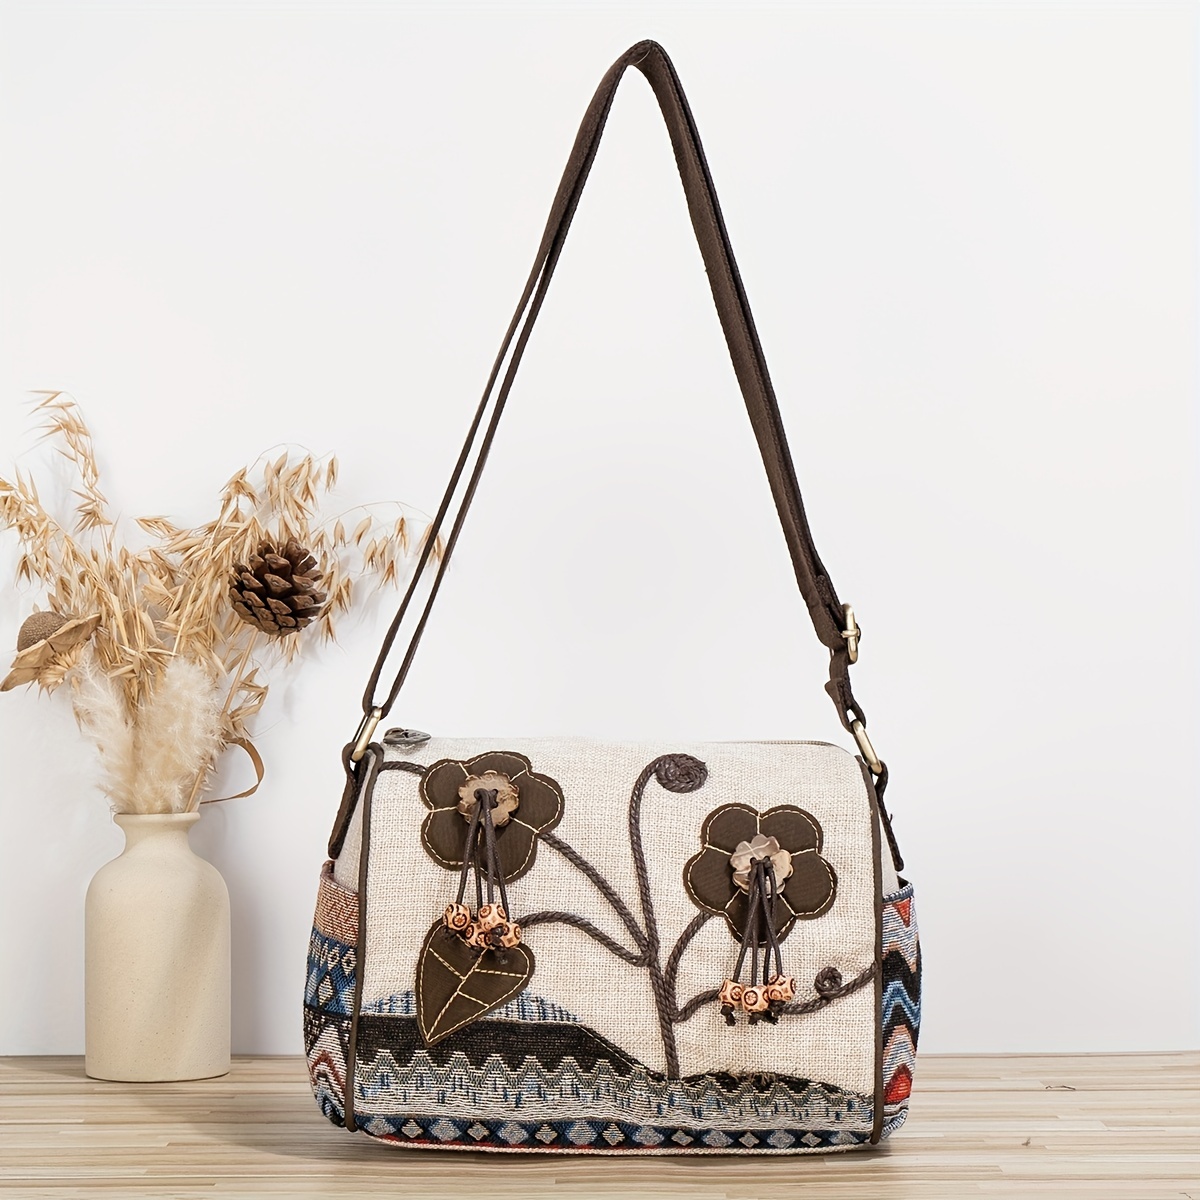 Journey by Vintage Boho Bags - Compact crossbody purse